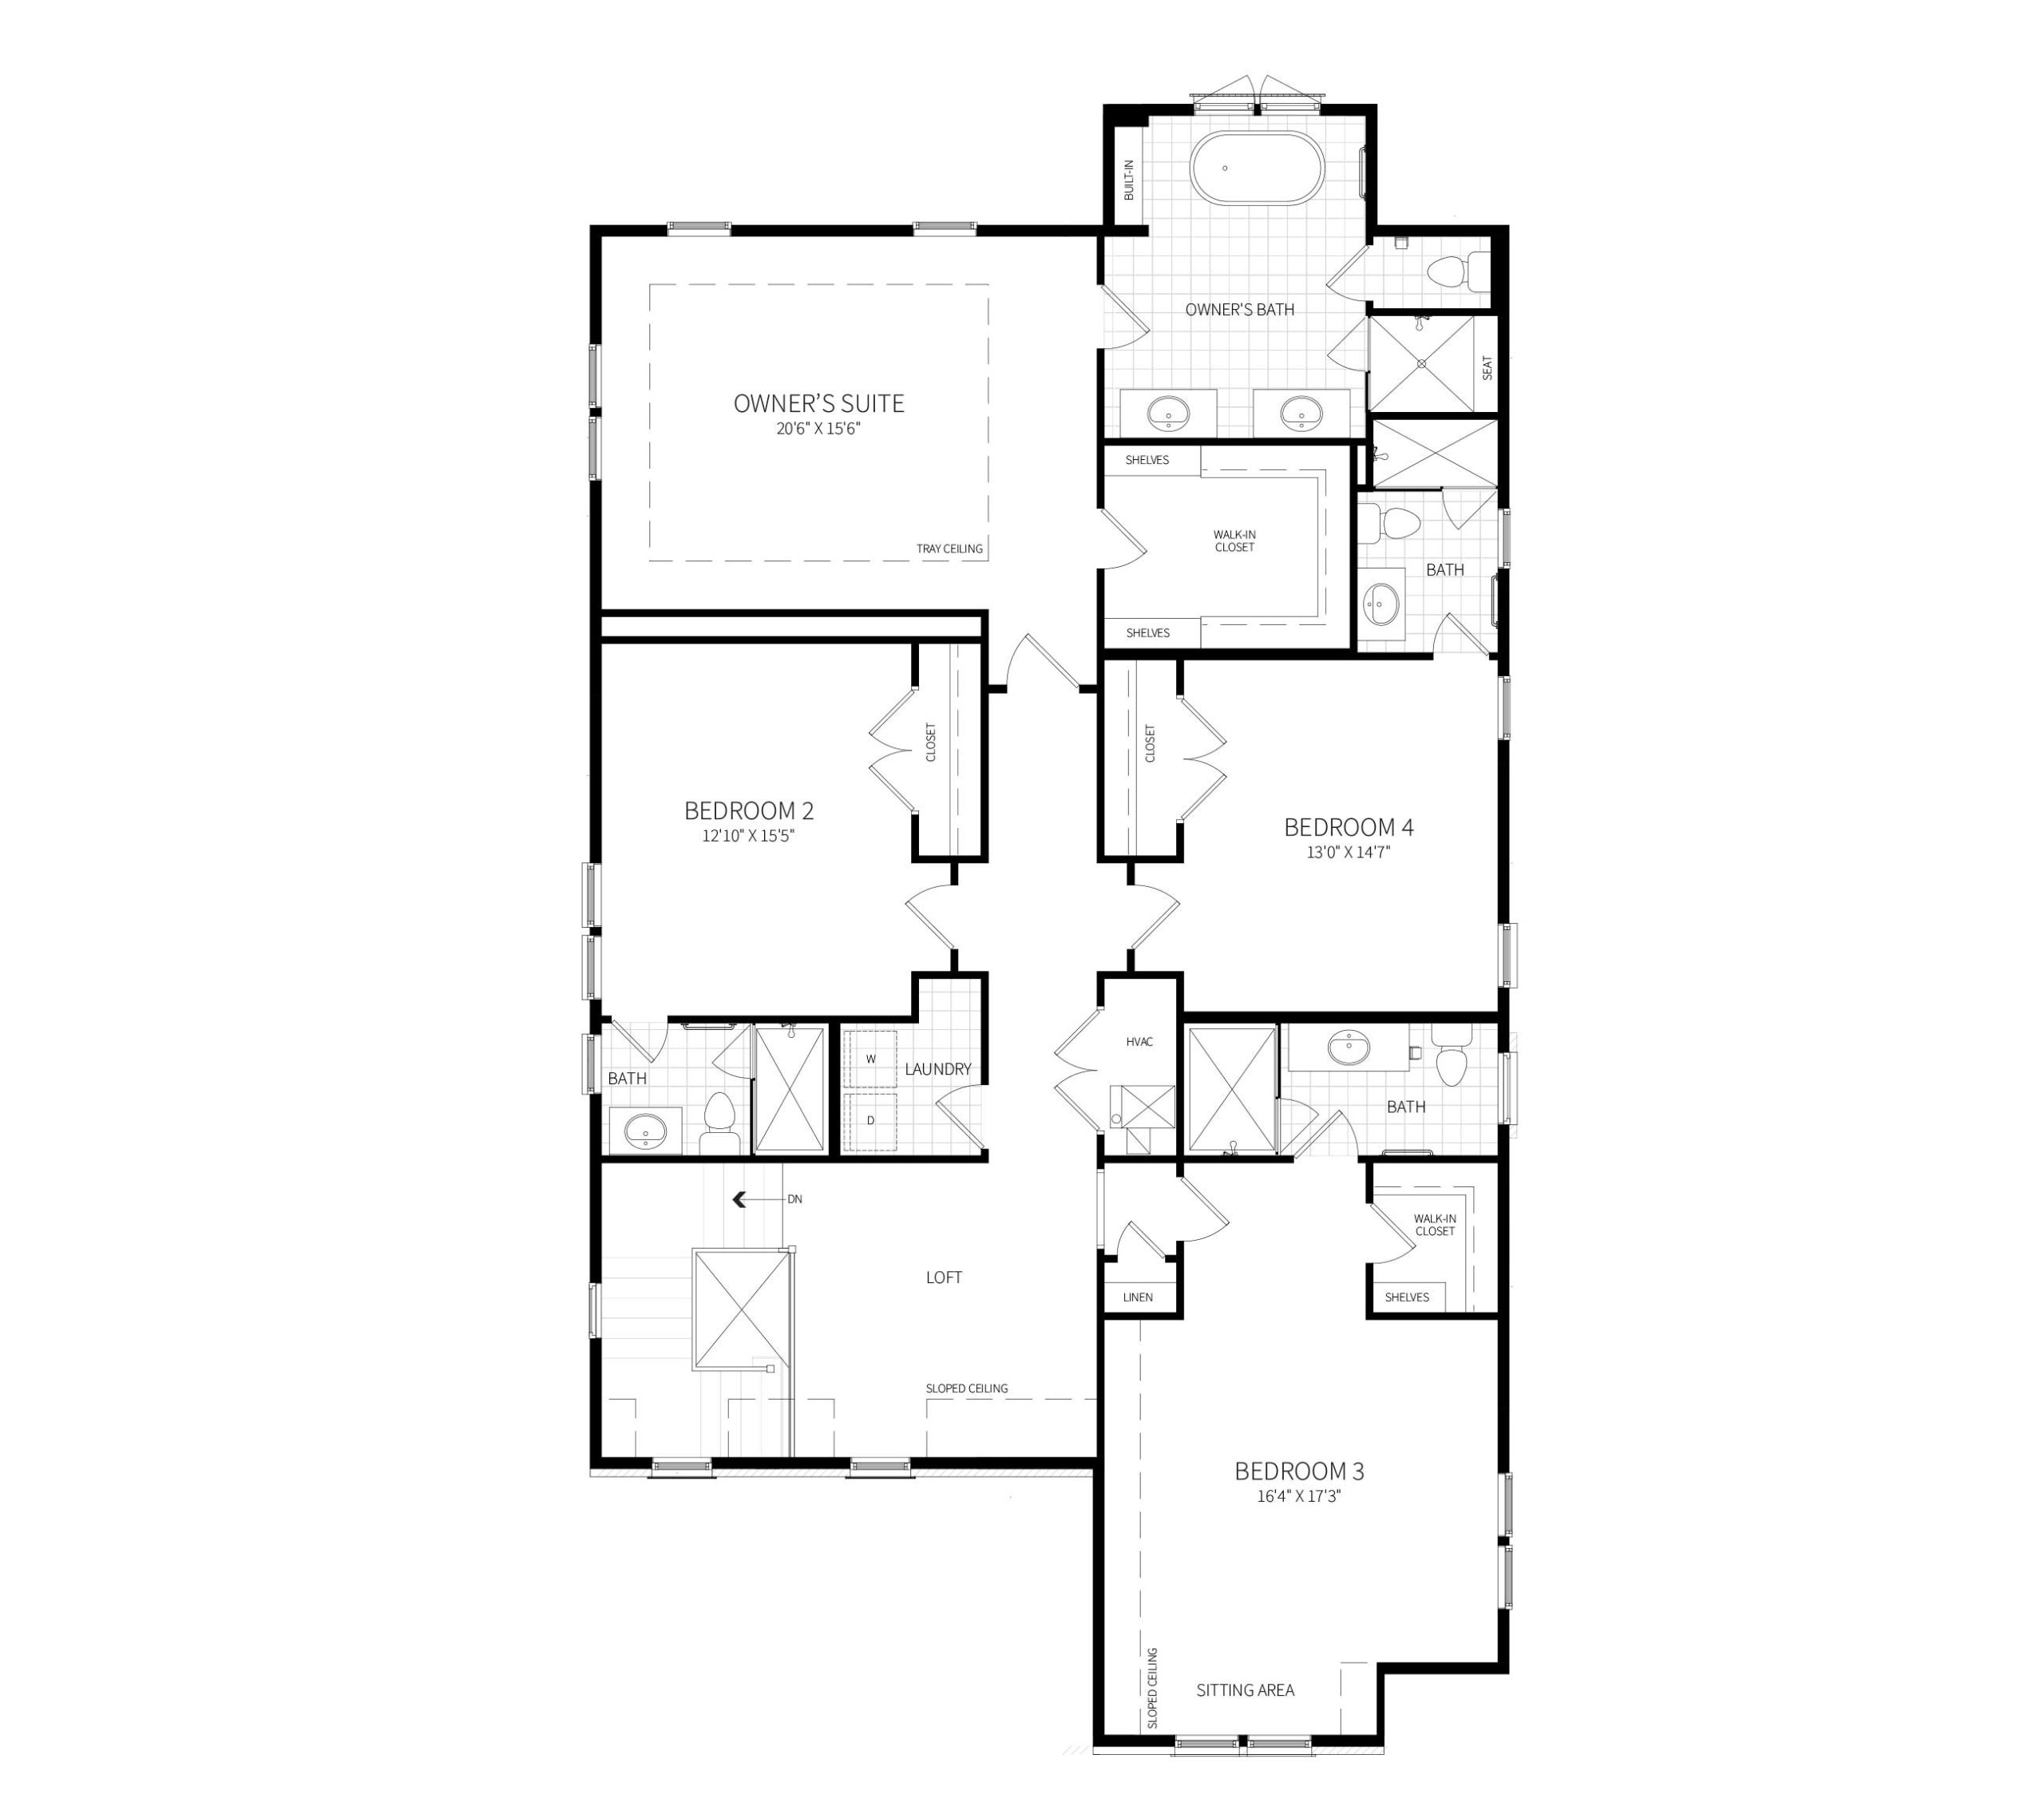 The second floor plan for the Woodmont, featuring a Loft, and 4 bedrooms, each with a private bath.